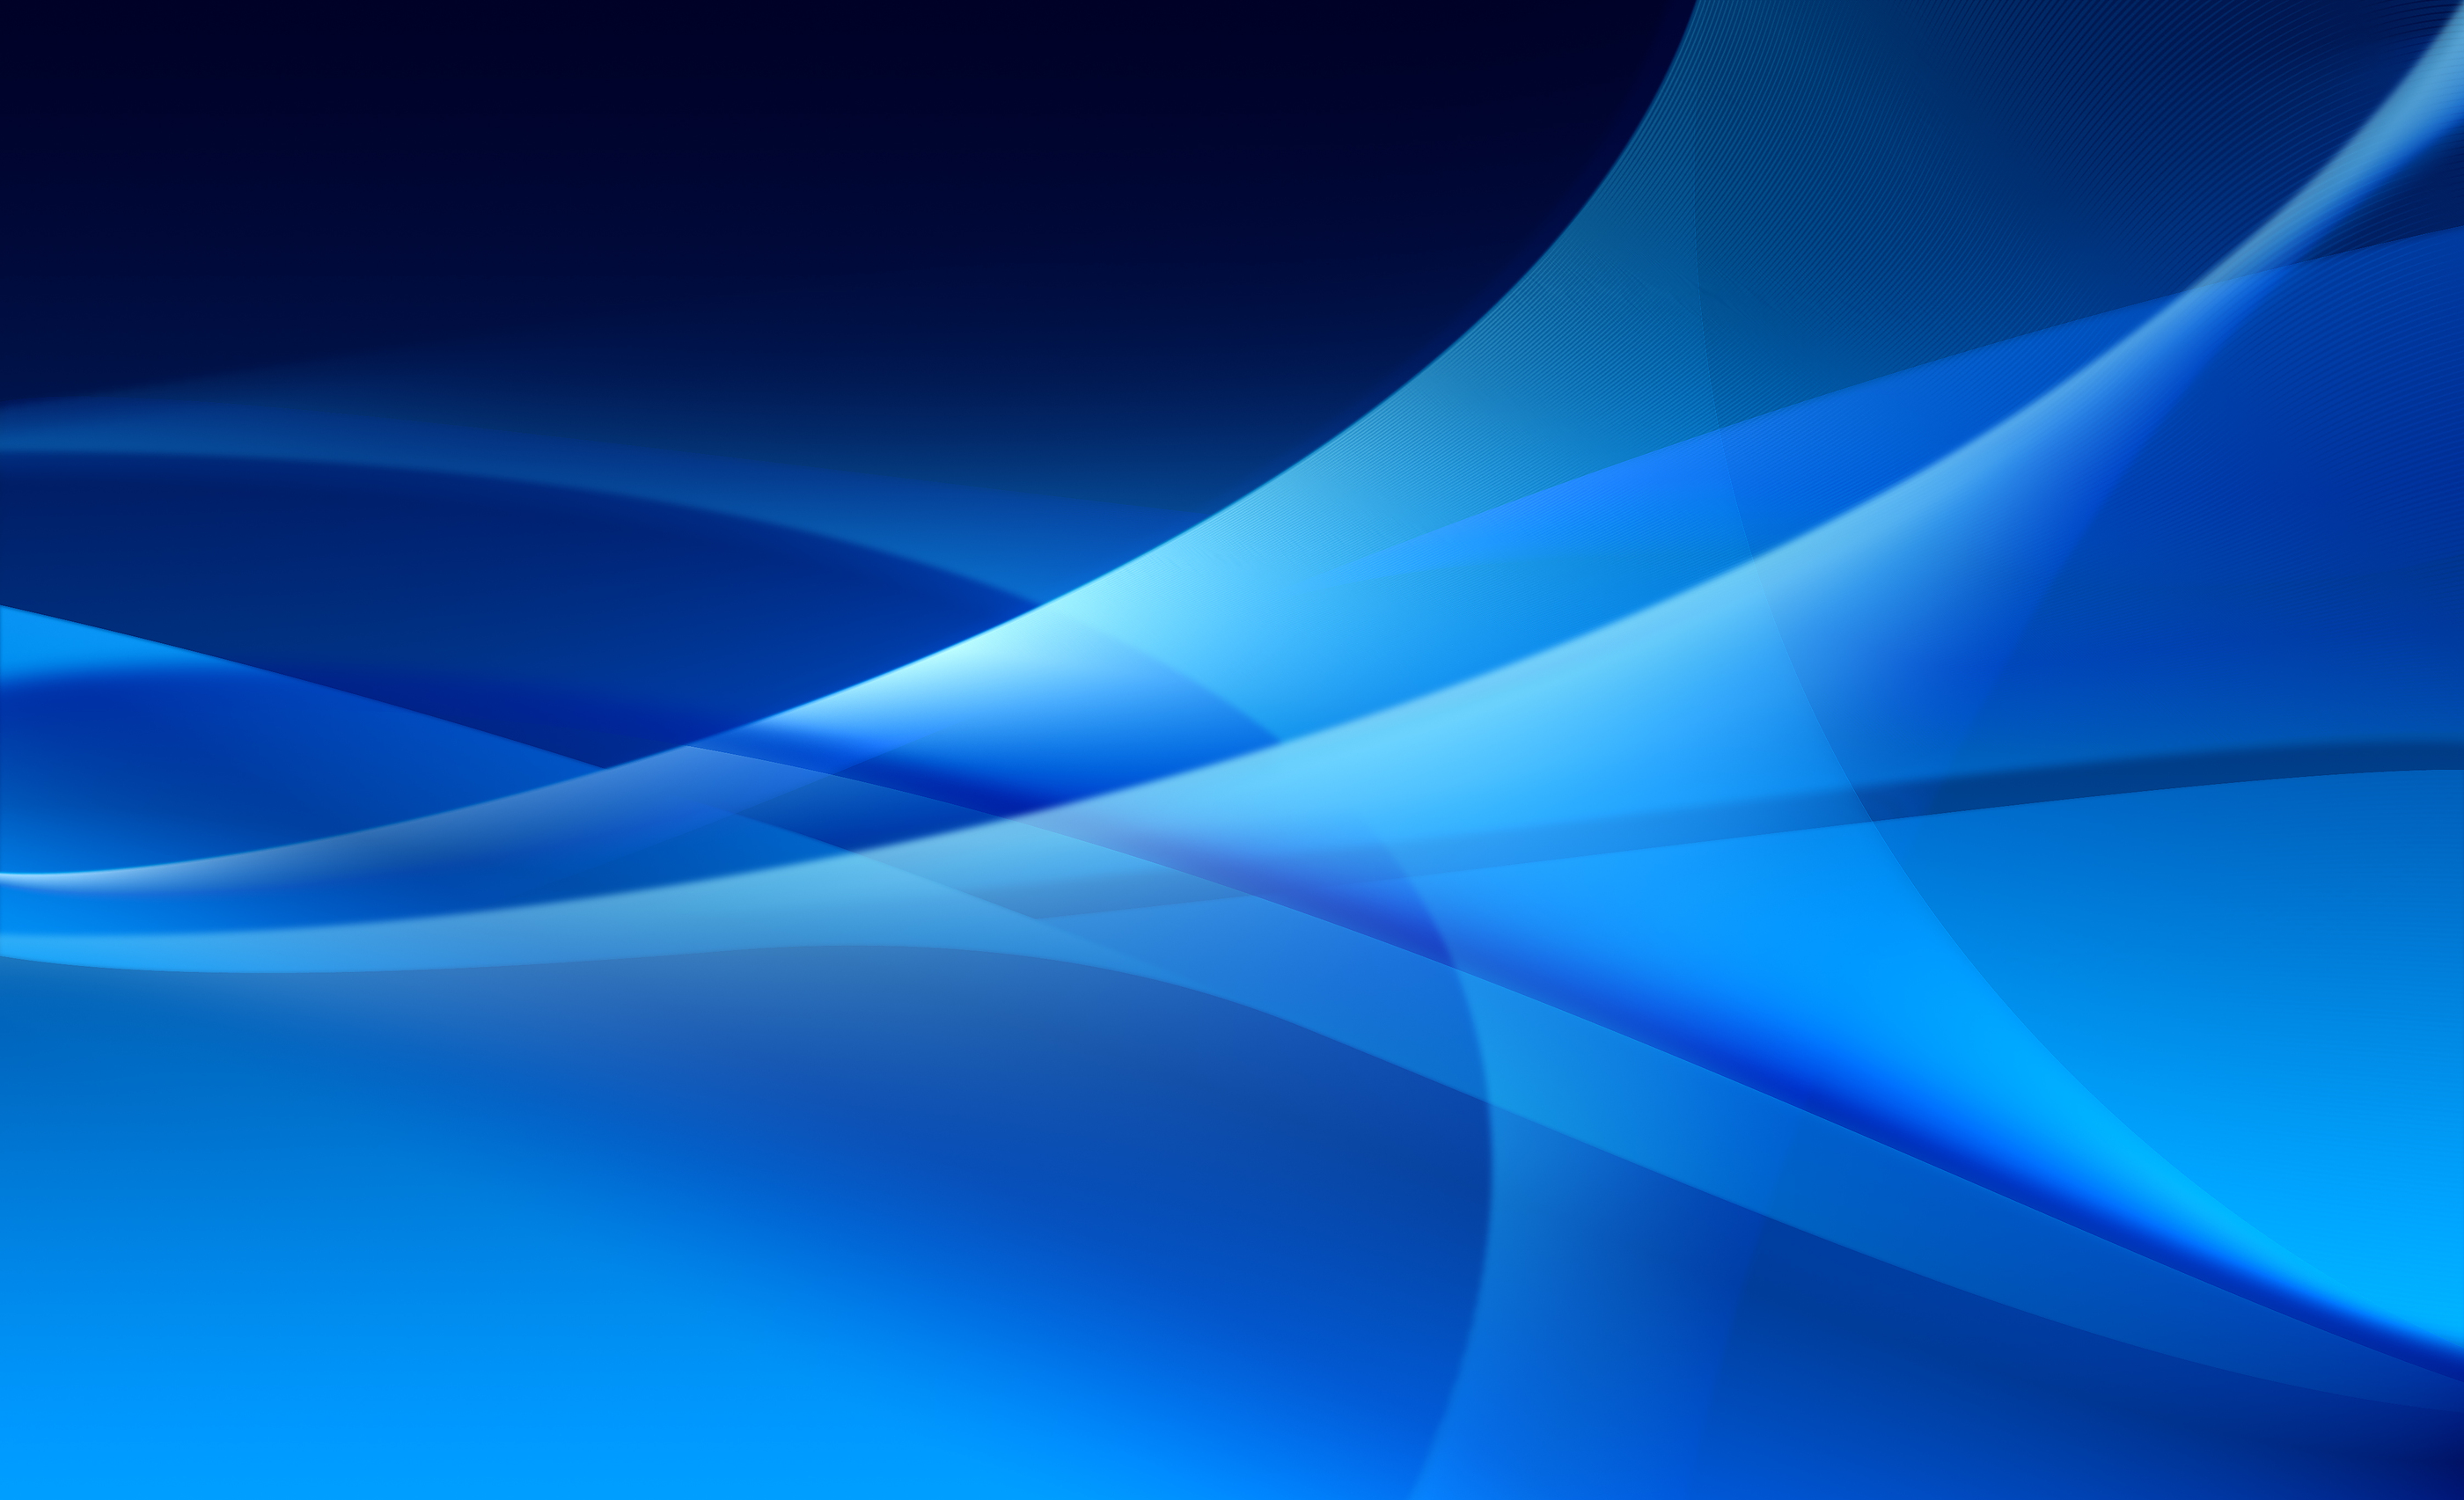 Blue Background Images   HD Wallpapers Backgrounds of Your